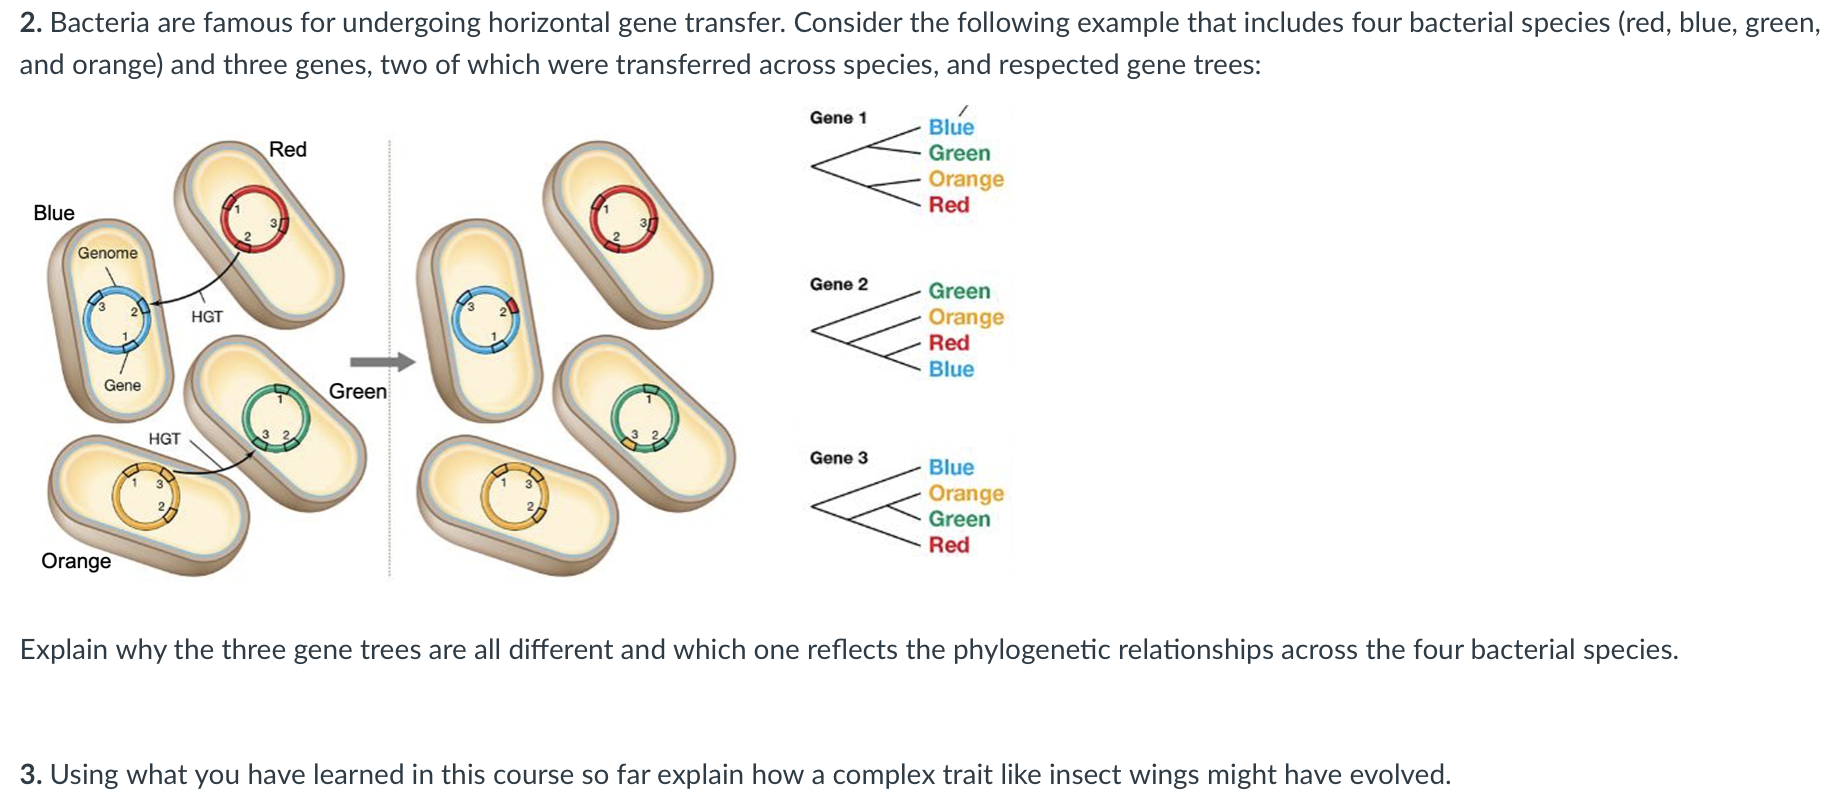 2. Bacteria are famous for undergoing horizontal gene transfer. Consider the following example that includes four bacterial s